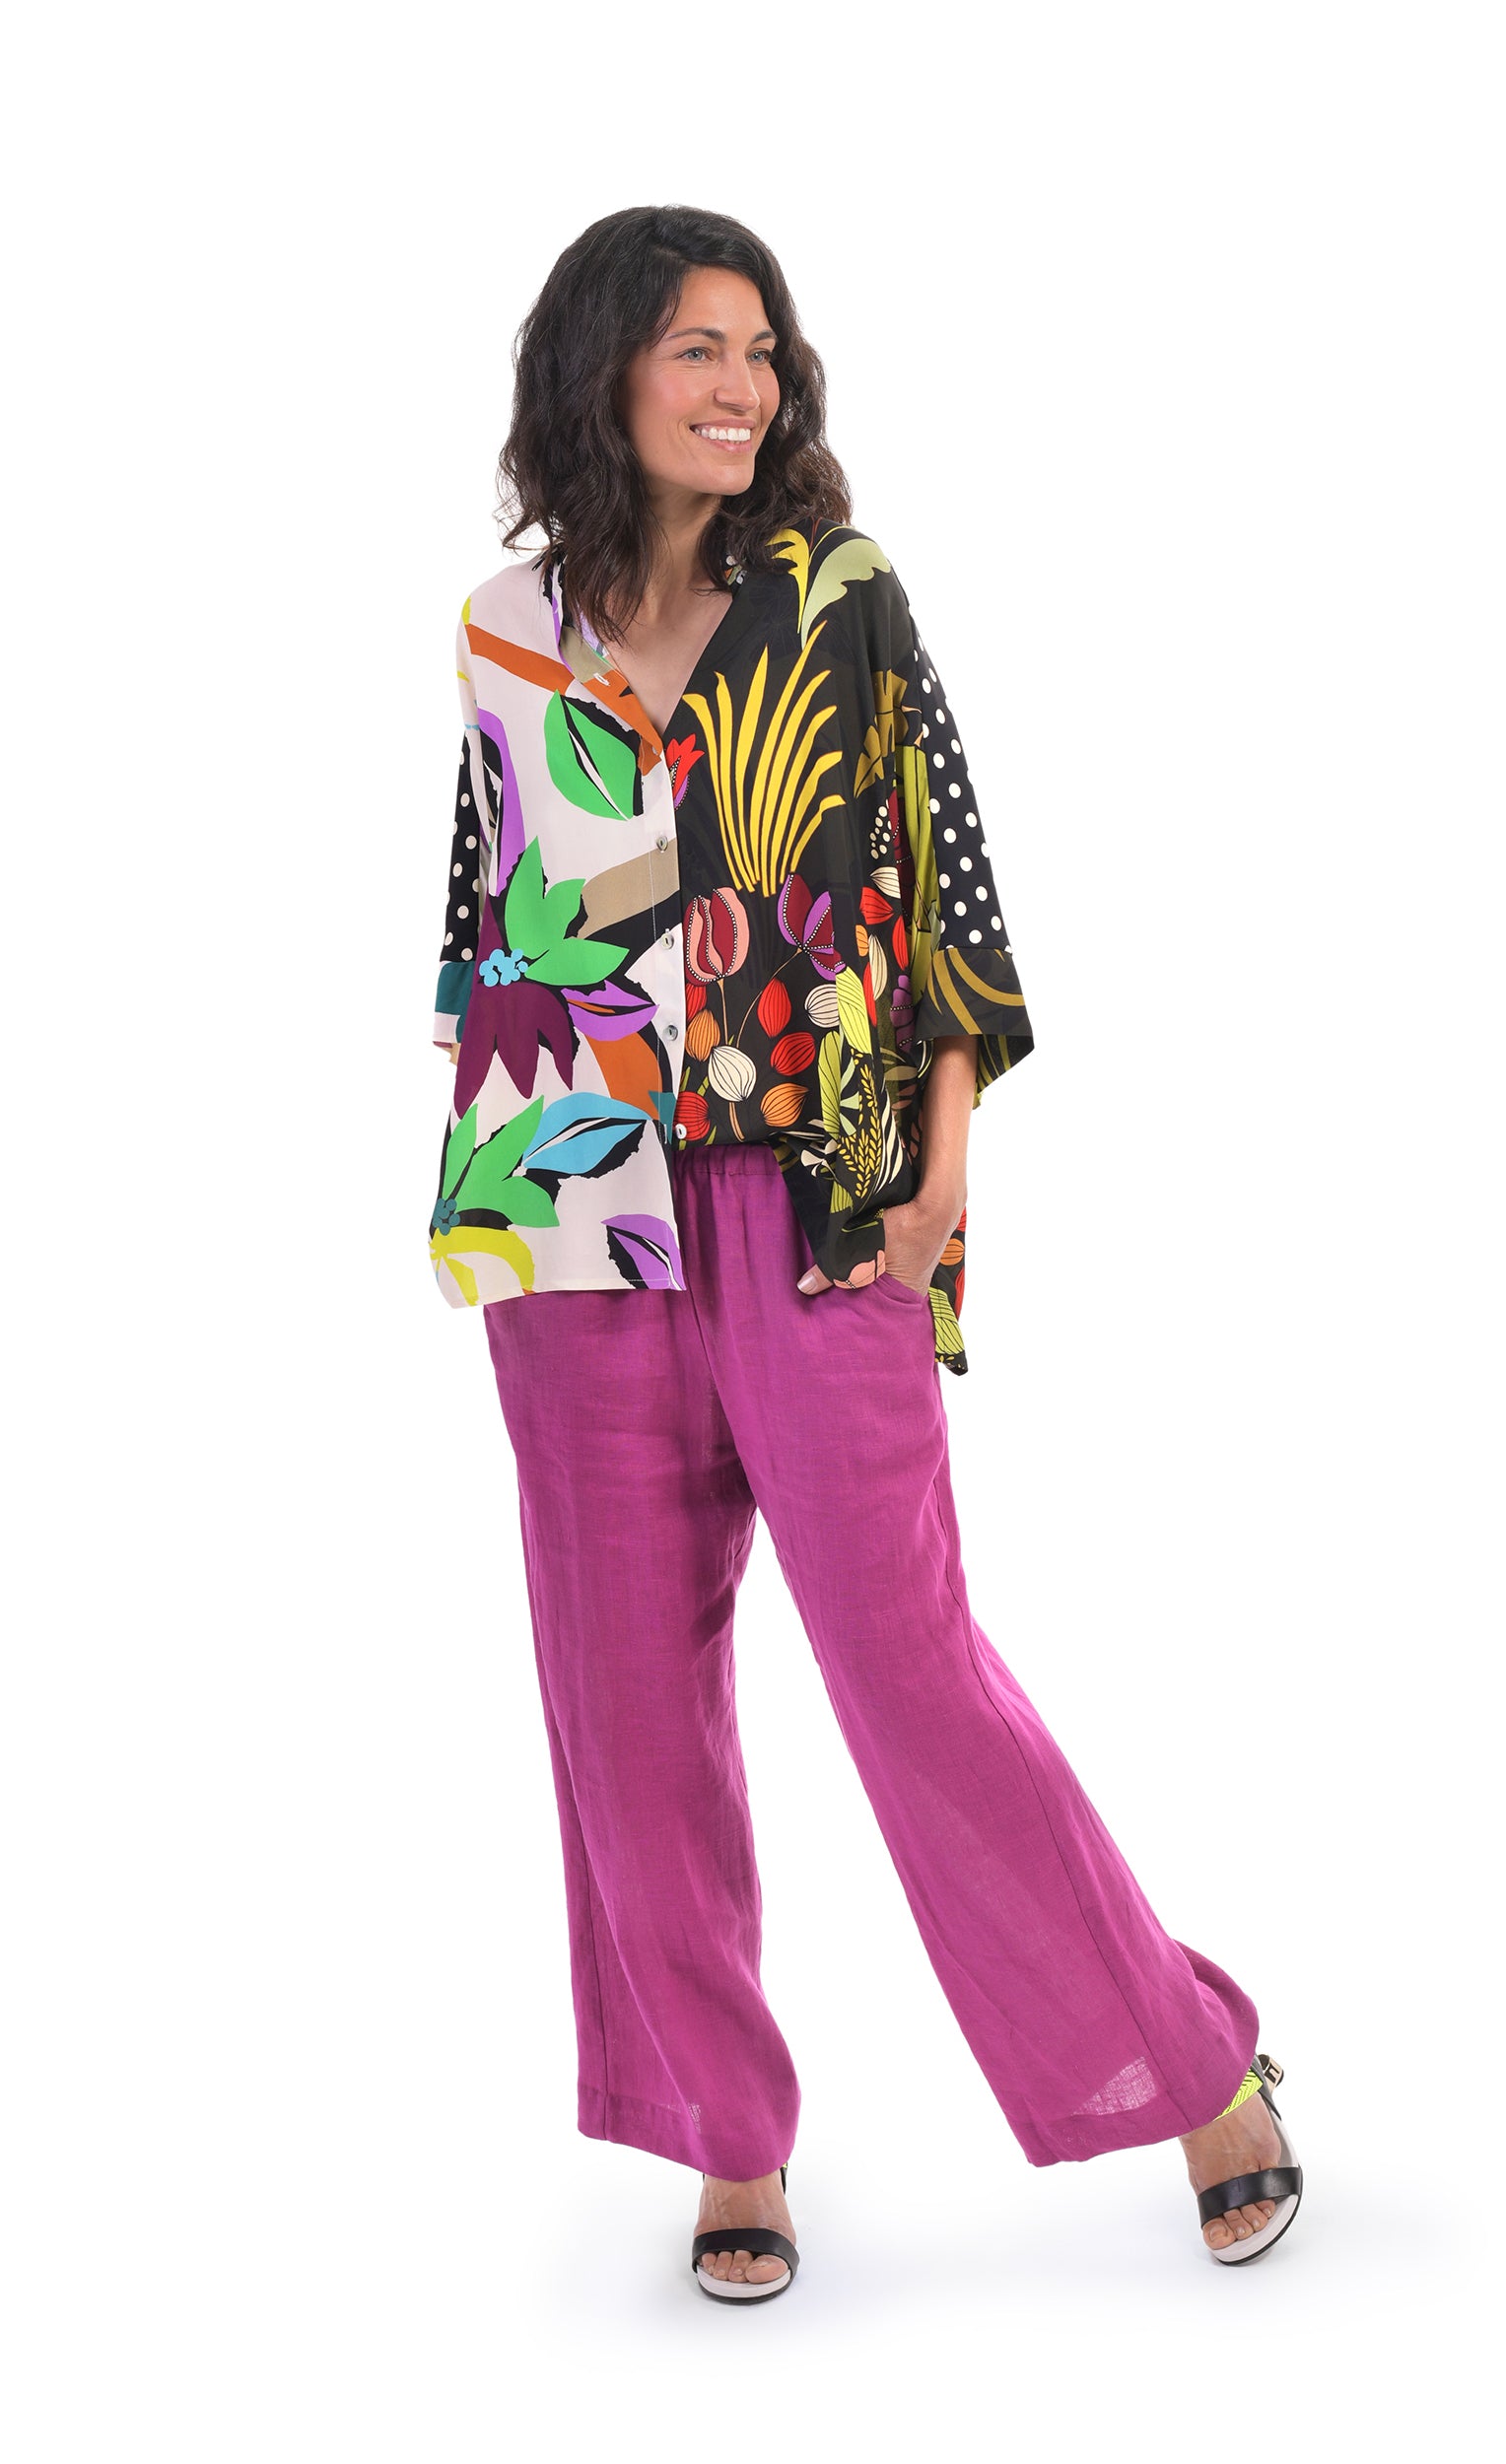 Front full body view of the alembika floral mix print campshirt. This shirt  has a light colored jungle print on the right side and a dark colored jungle print on the left side. The shirt has a button down front, dotted sleeves, a relaxed fit, and drop shoulders. On the bottom she is wearing pink pants.